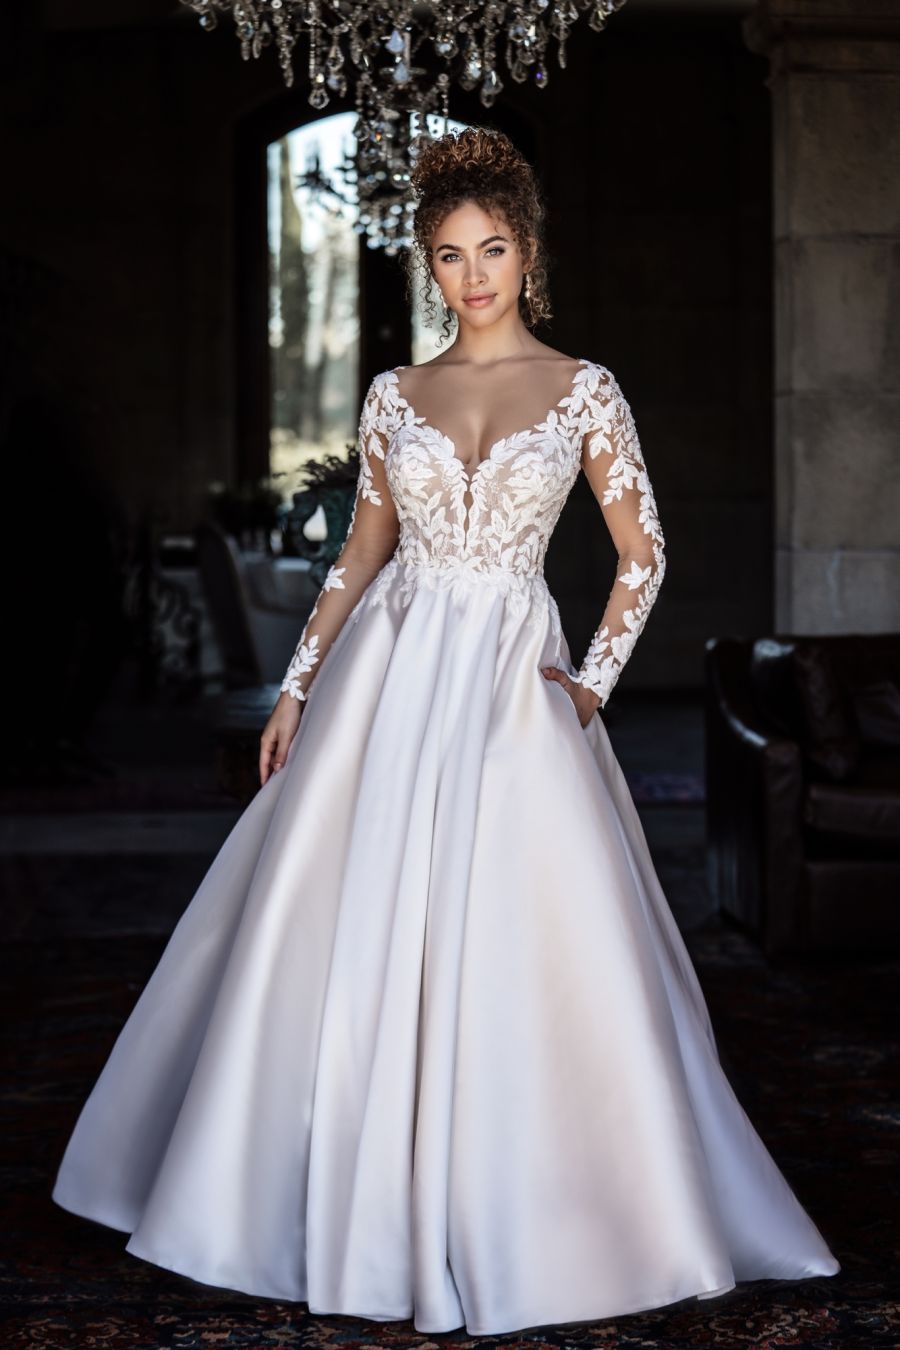 Bridal Gowns | Engagement gowns, Party wear evening gowns, Princess ball  gowns